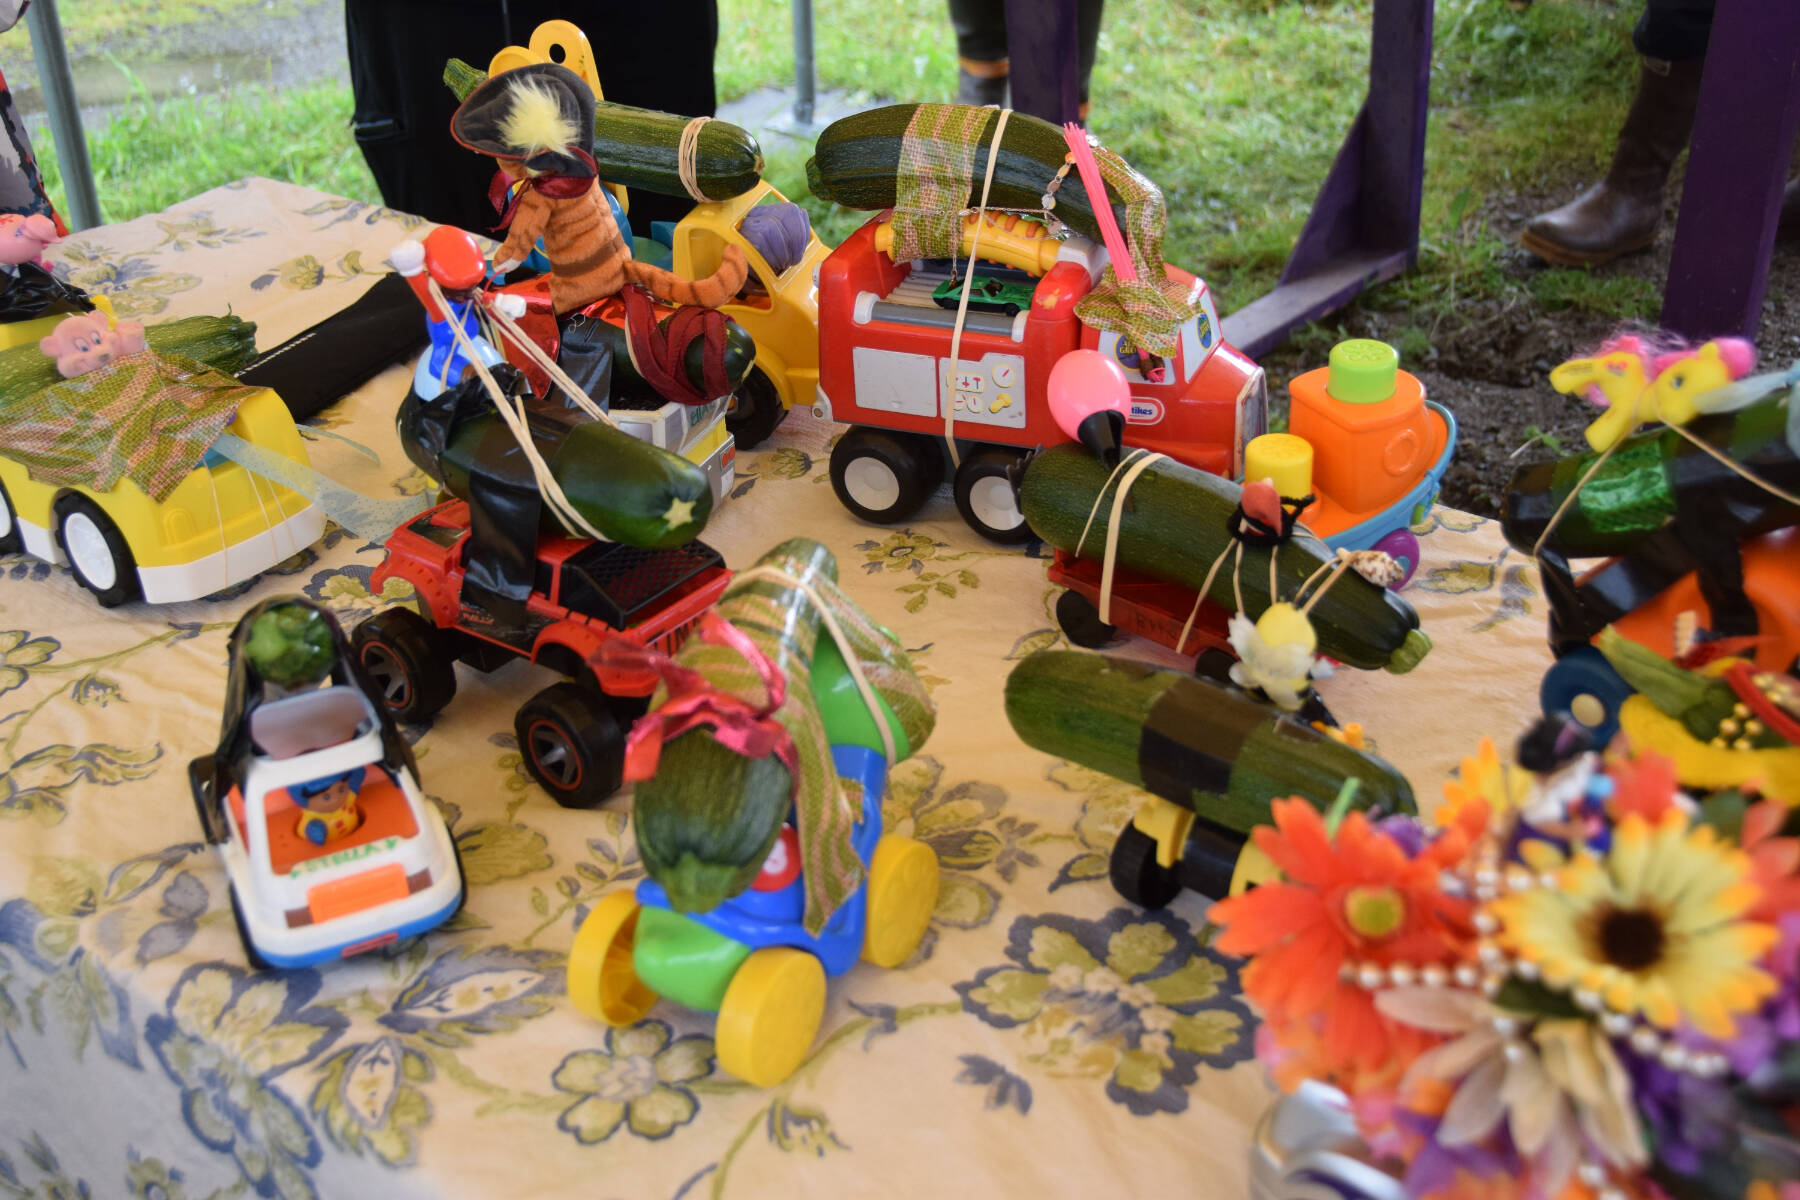 Zucchini cars crafted by participating kids are ready to race at the Homer Farmers Market Zucchini Festival on Saturday, Aug. 26, 2023 in Homer, Alaska. (Delcenia Cosman/Homer News)